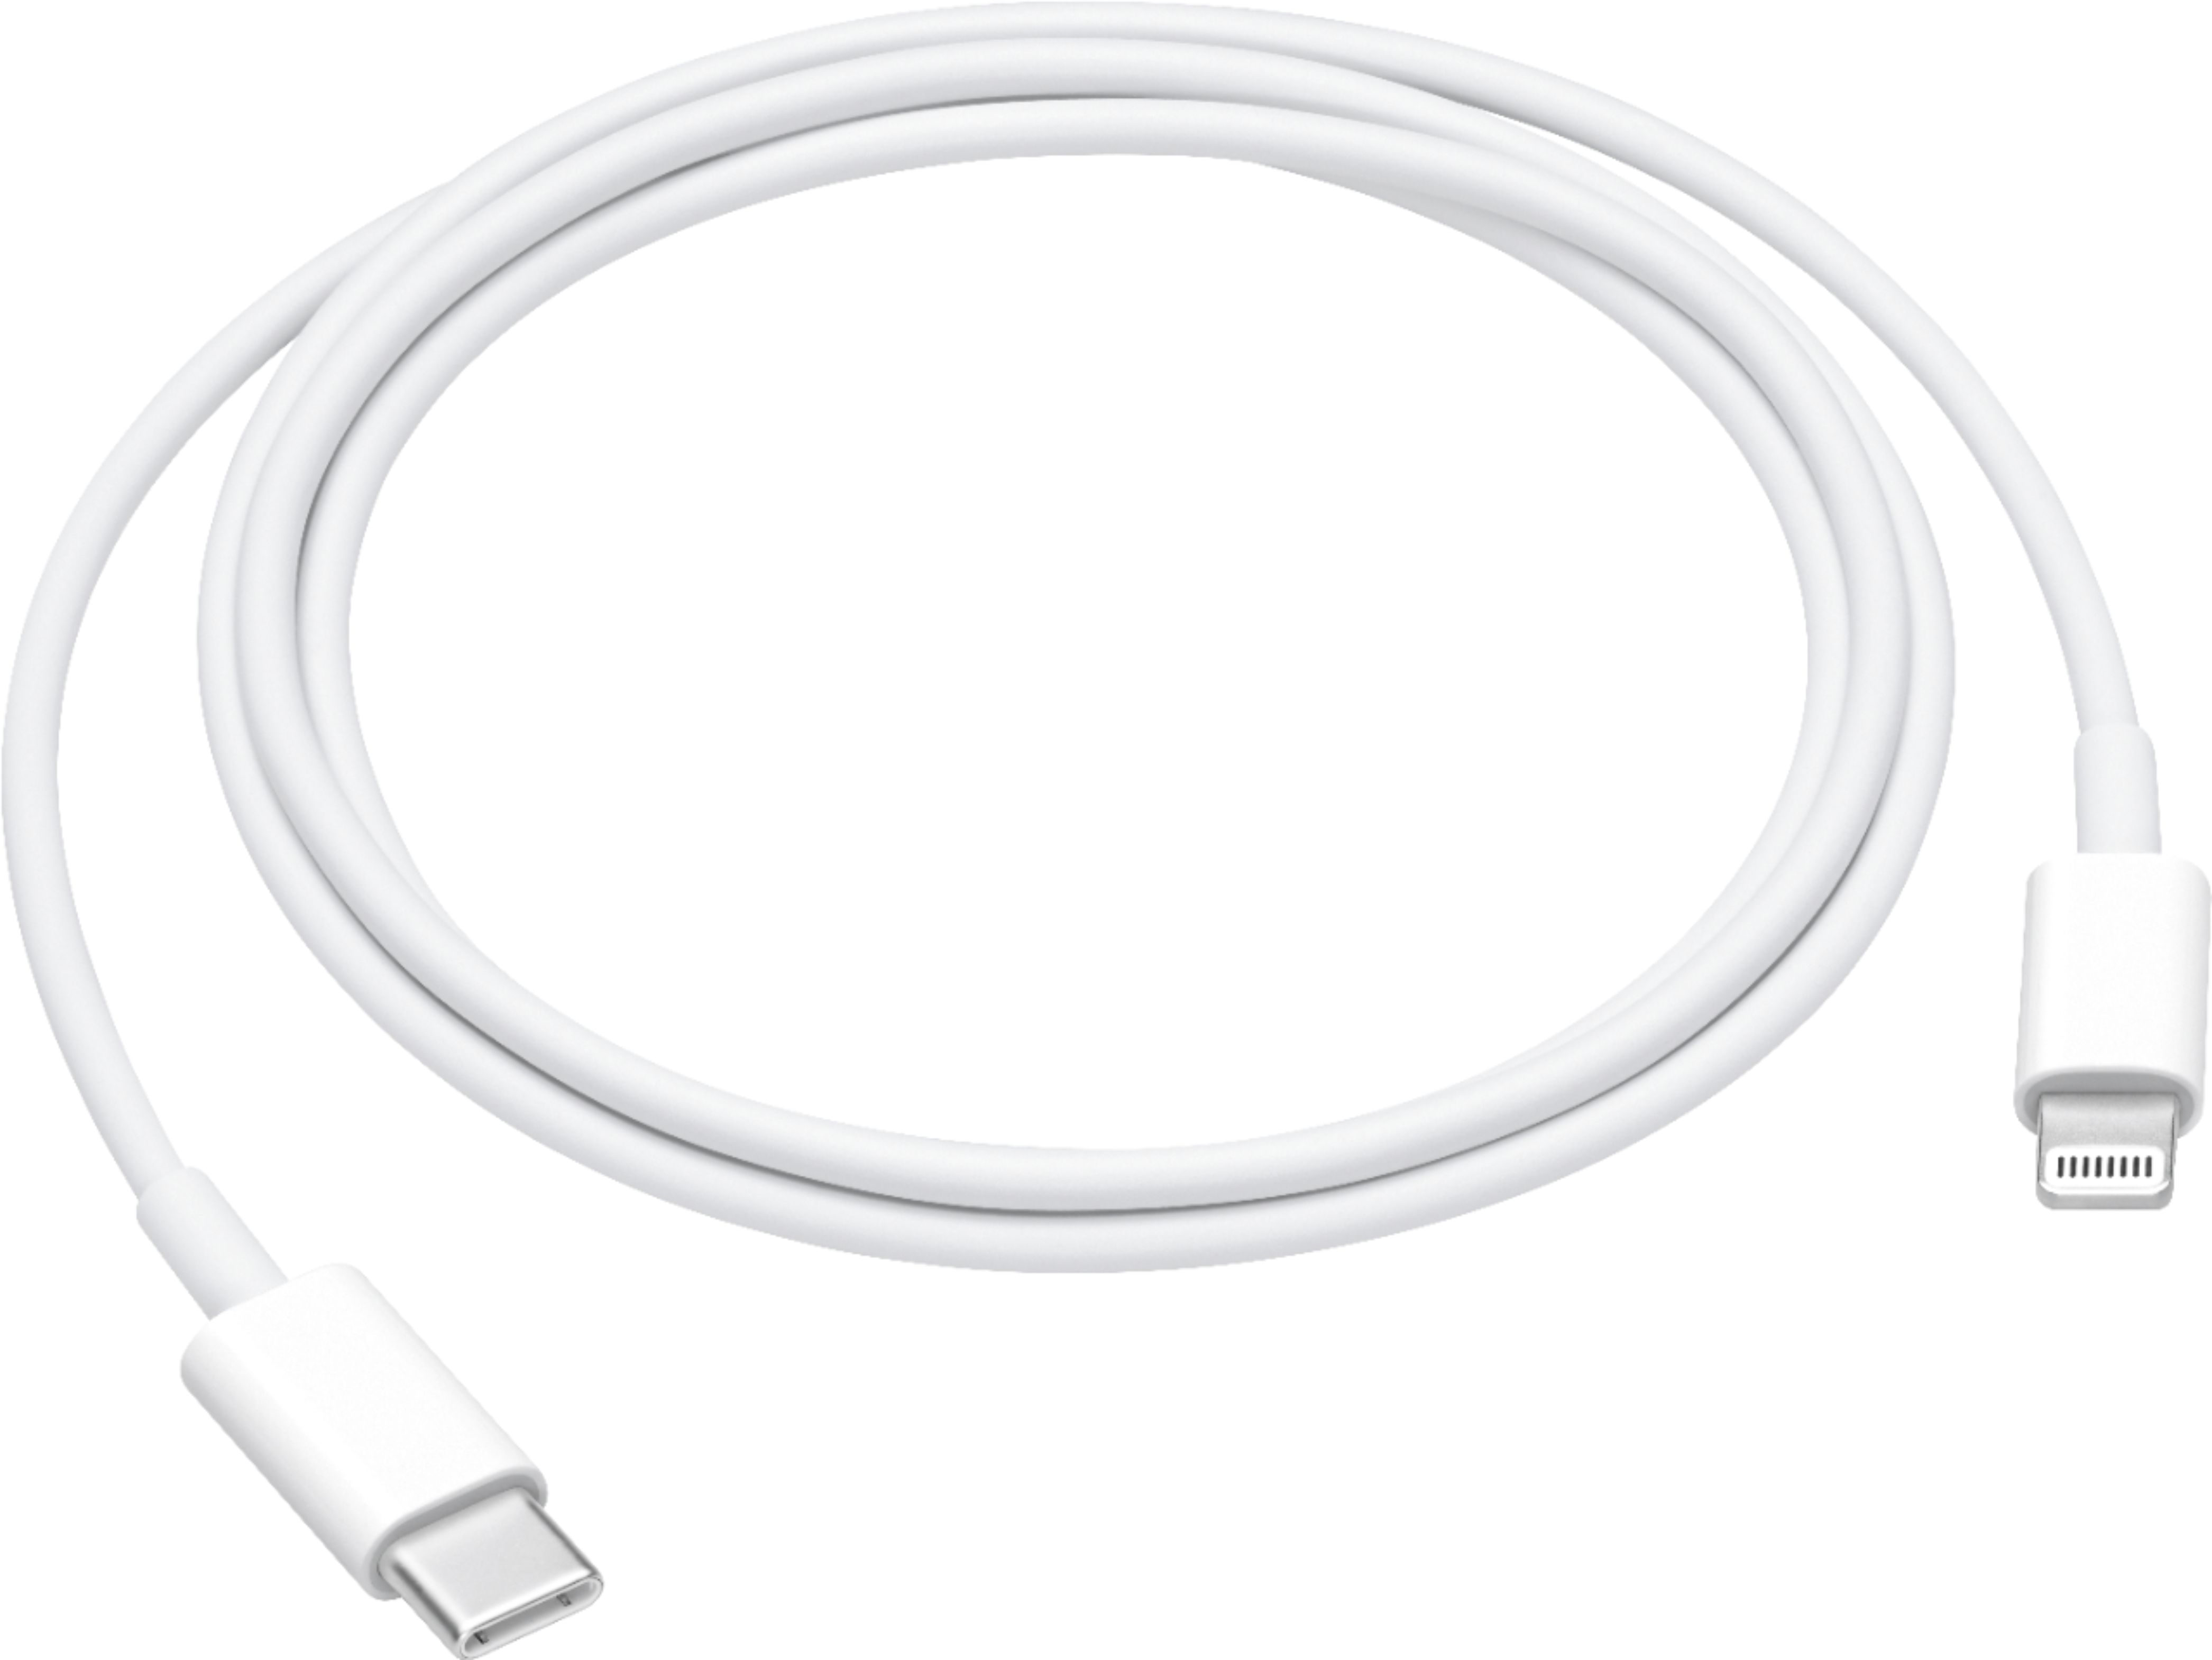 Elevator robot Kammer 3.3' USB-C to Lightning Cable for Apple iPad 10.2" (7th Generation 2019)  and USB-C or Thunderbolt 3 (USB-C) enabled Mac White MQGJ2AM/A - Best Buy